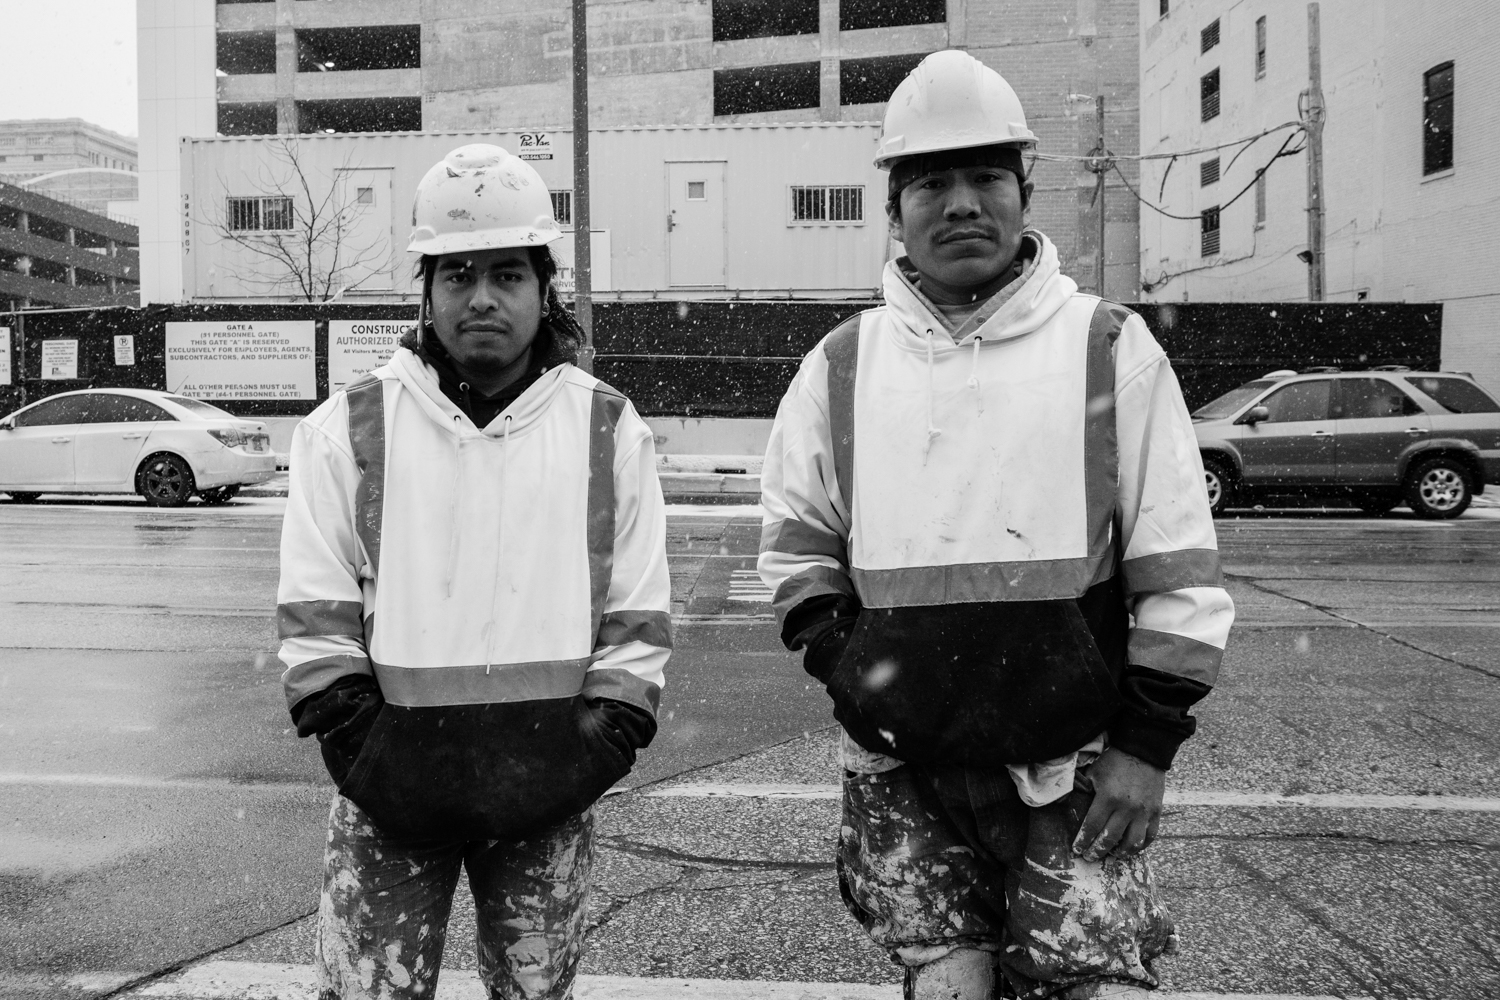 Mixe construction workers pose for a portrait in front of their worksite. Milwaukee, Wisconsin, USA.